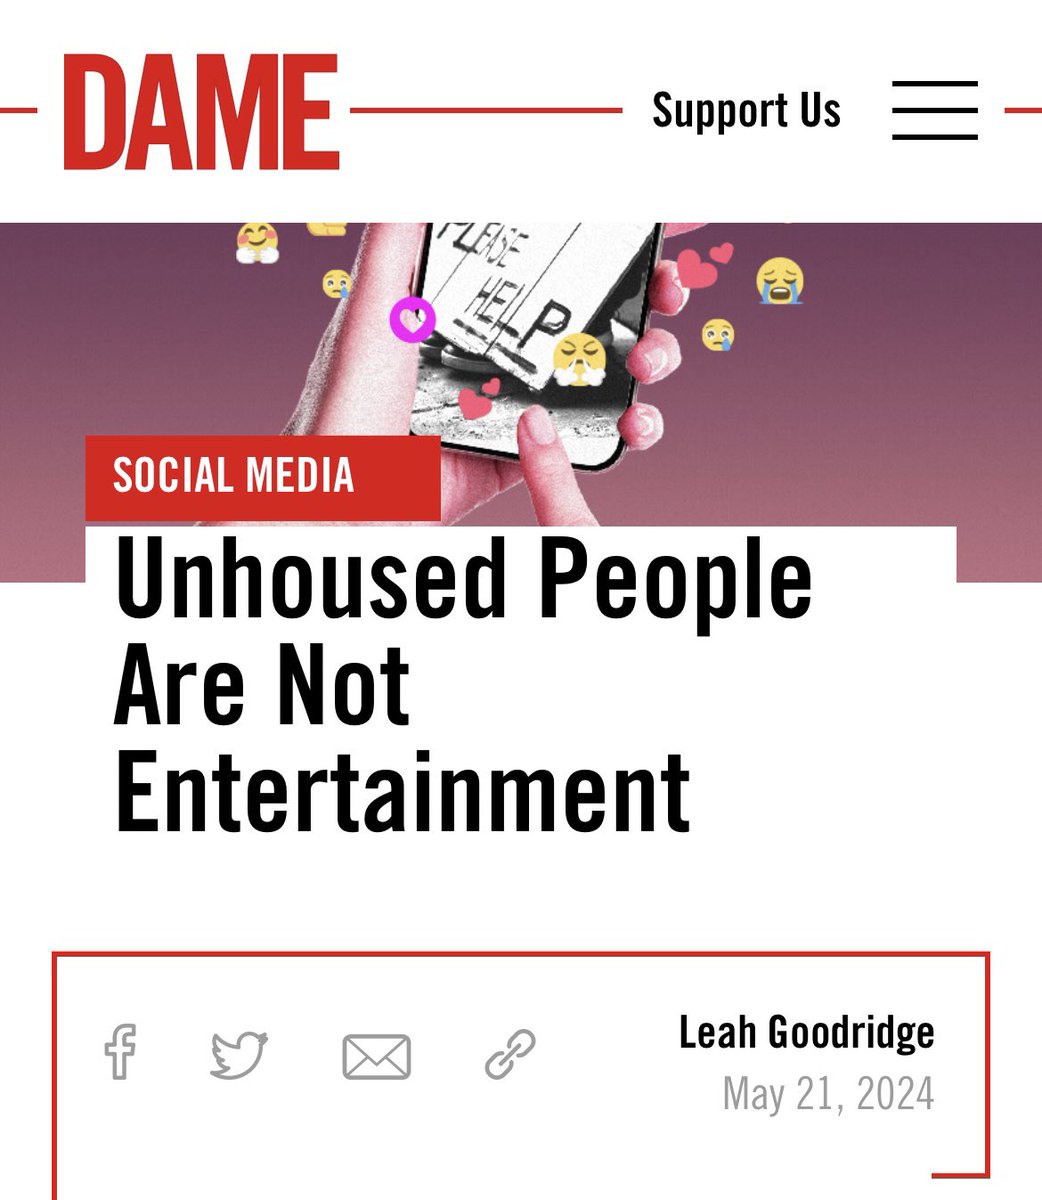 Last year, a content creator filmed himself offering an unhoused man a burger….then eating it in front of him instead of handing it to him. This is, unfortunately, not rare content. It’s part of a new disturbing trend. My latest for @damemagazine damemagazine.com/2024/05/21/unh…